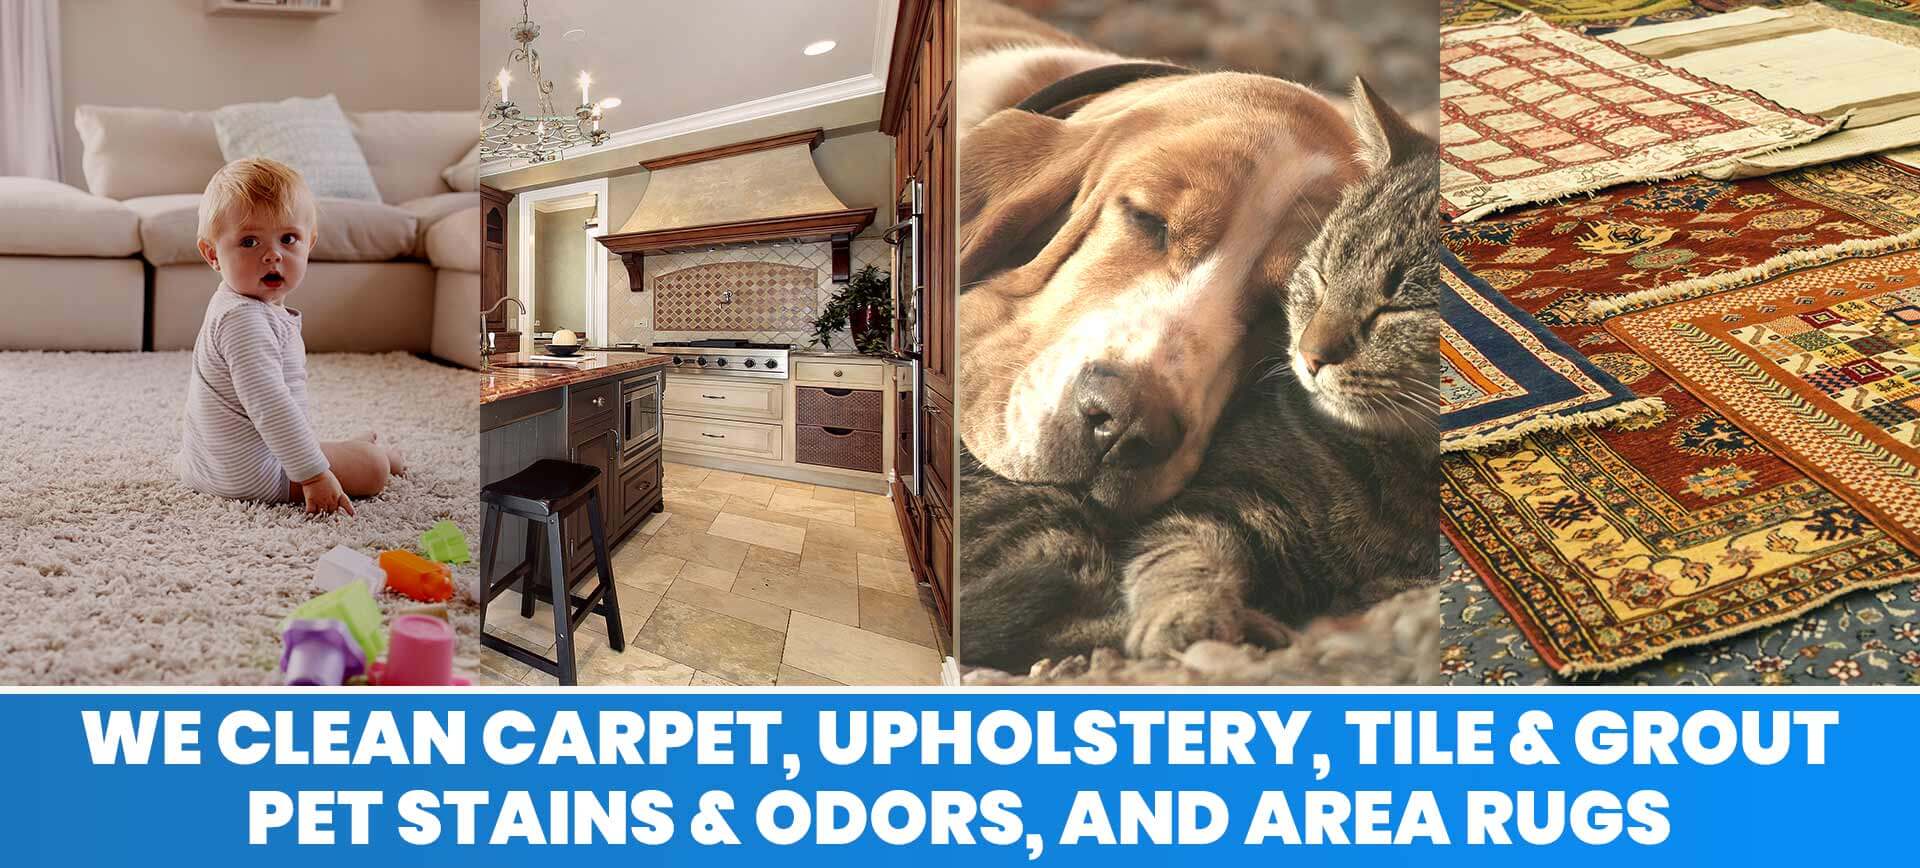 carpet cleaning services in Virginia Beach